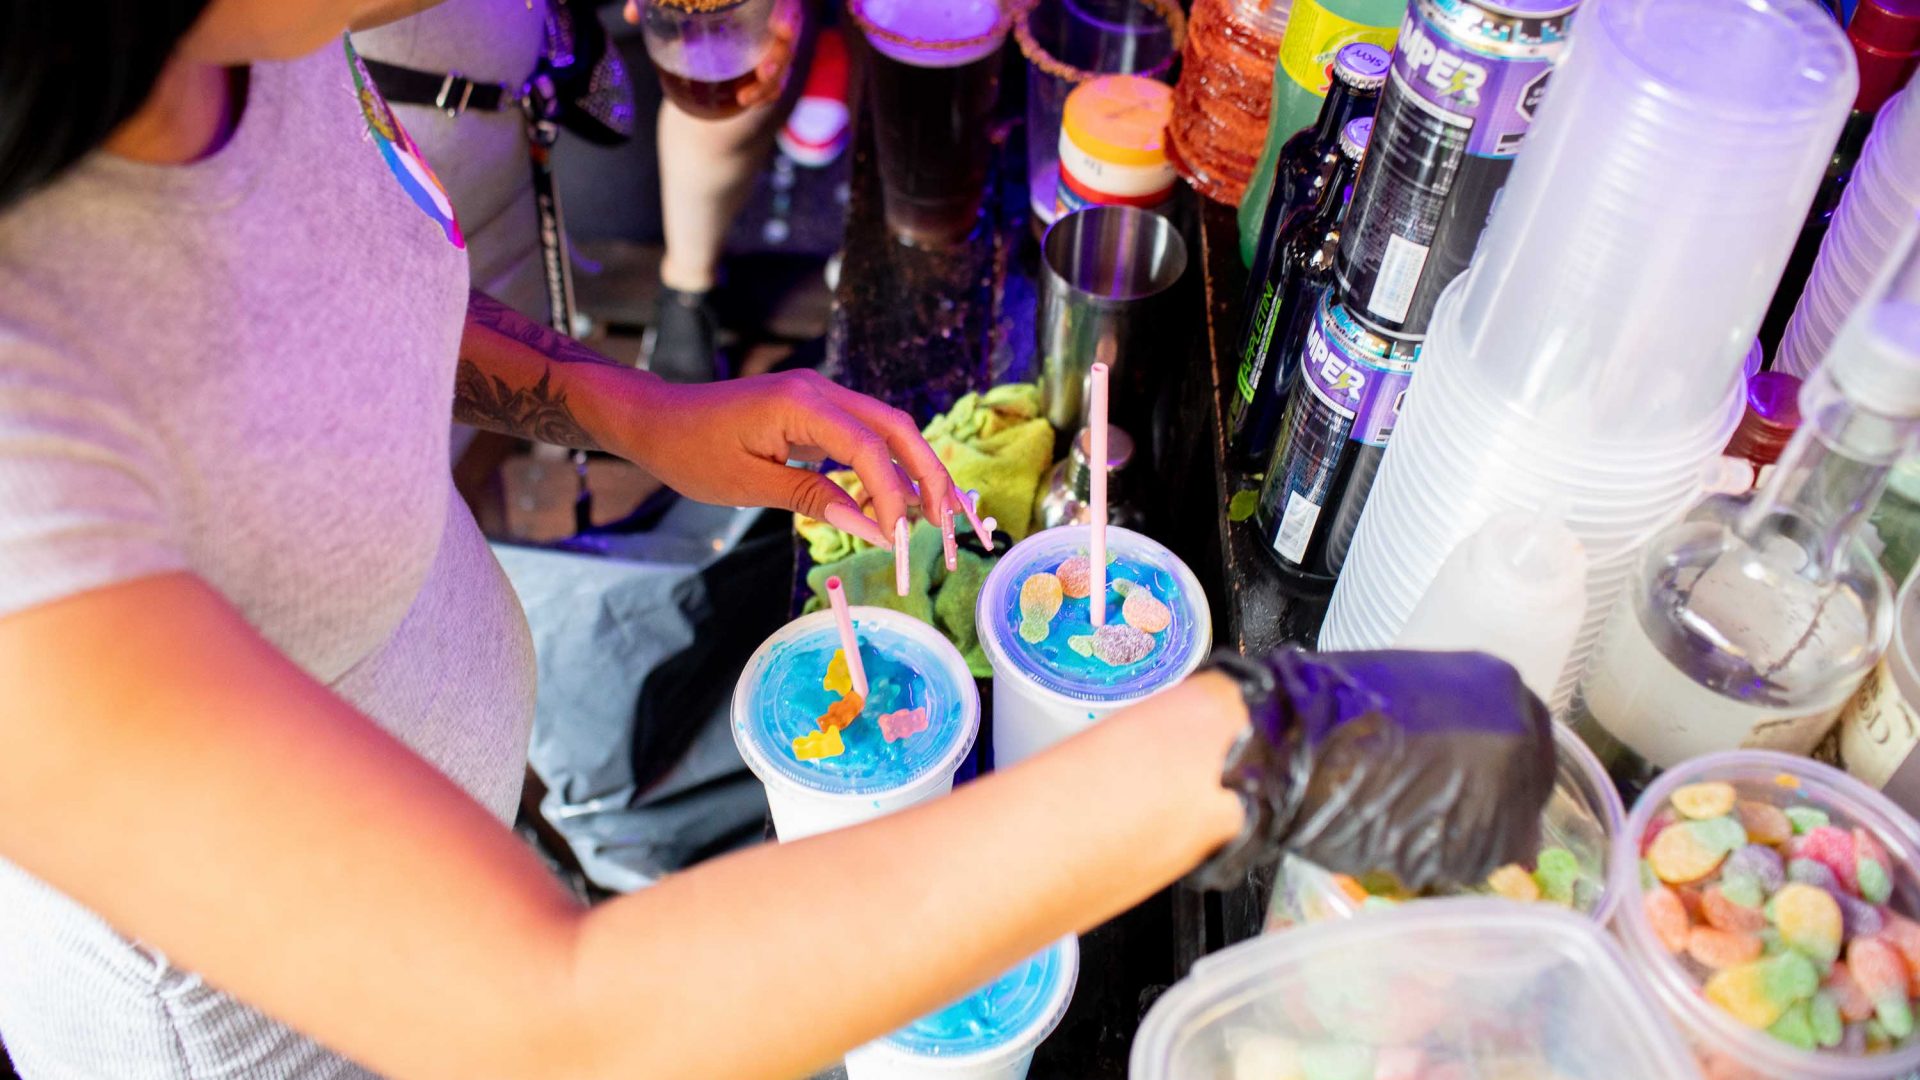 A person's hands can be seen making blue candy covered micheladas.